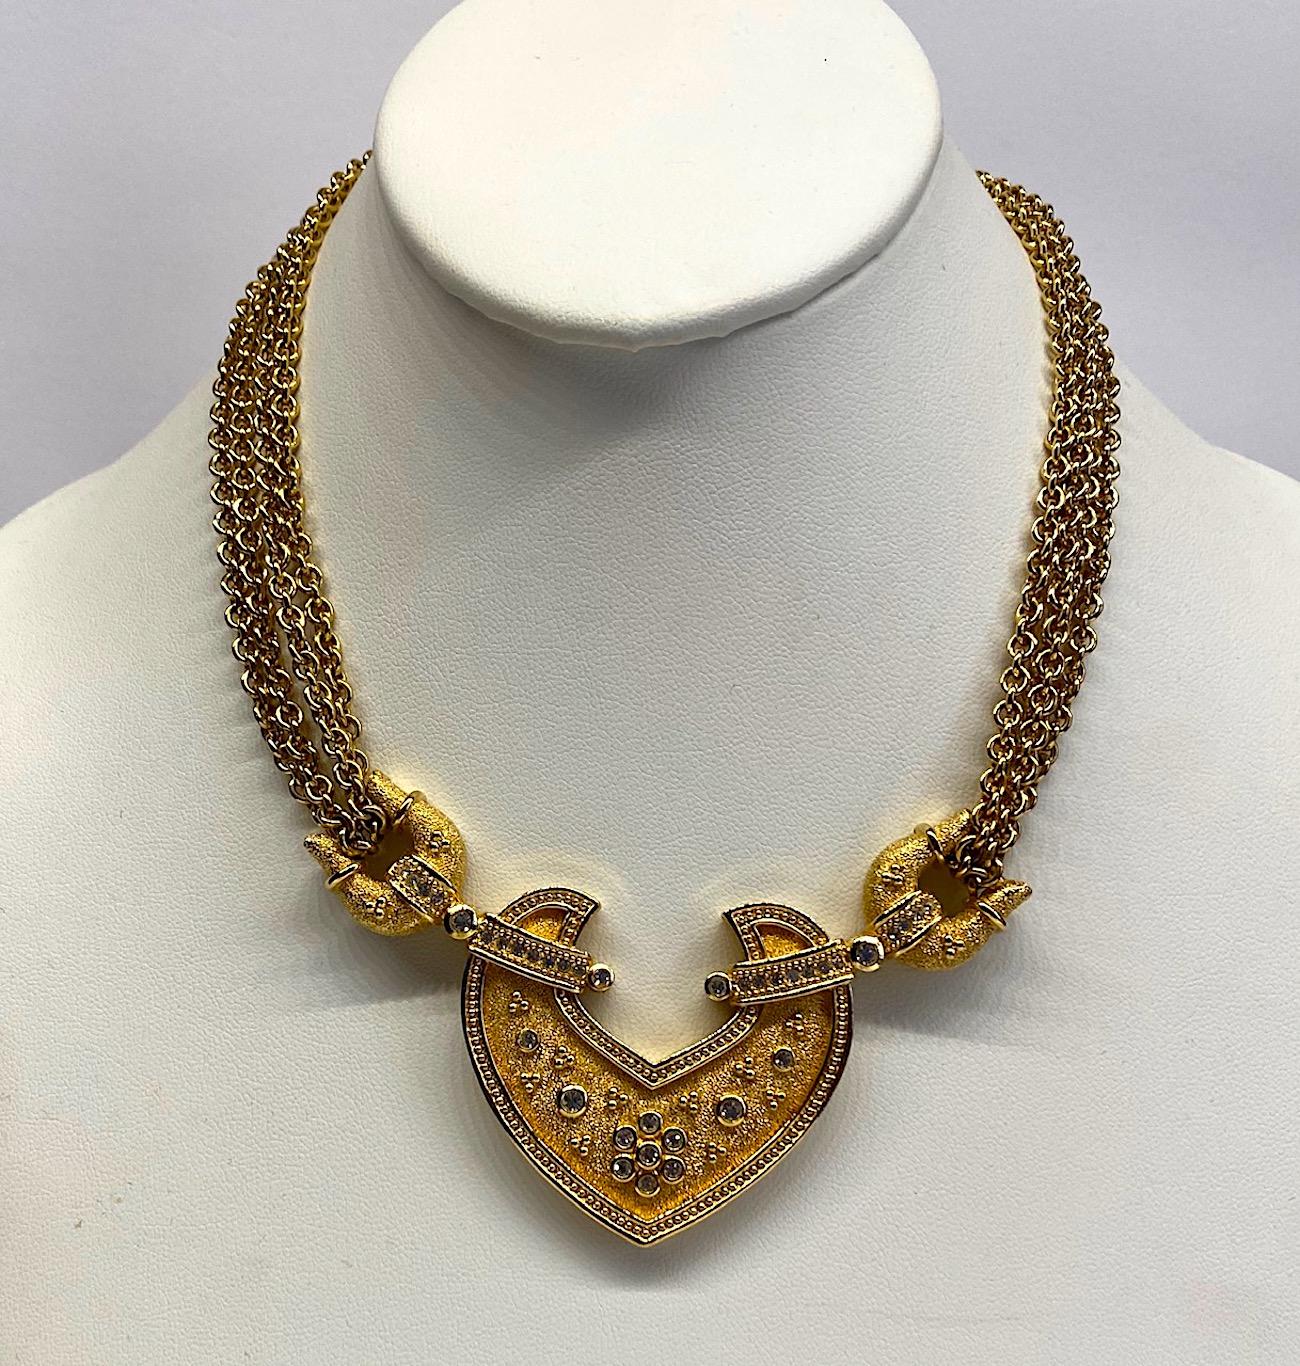 A beautiful multi chain with central pendant 1980s necklace by German company Grosse. Two strands on each side descend from the back clasp down, wrap around the side pieces of the pendant and return up to the clasp. The chains, and clasp are in